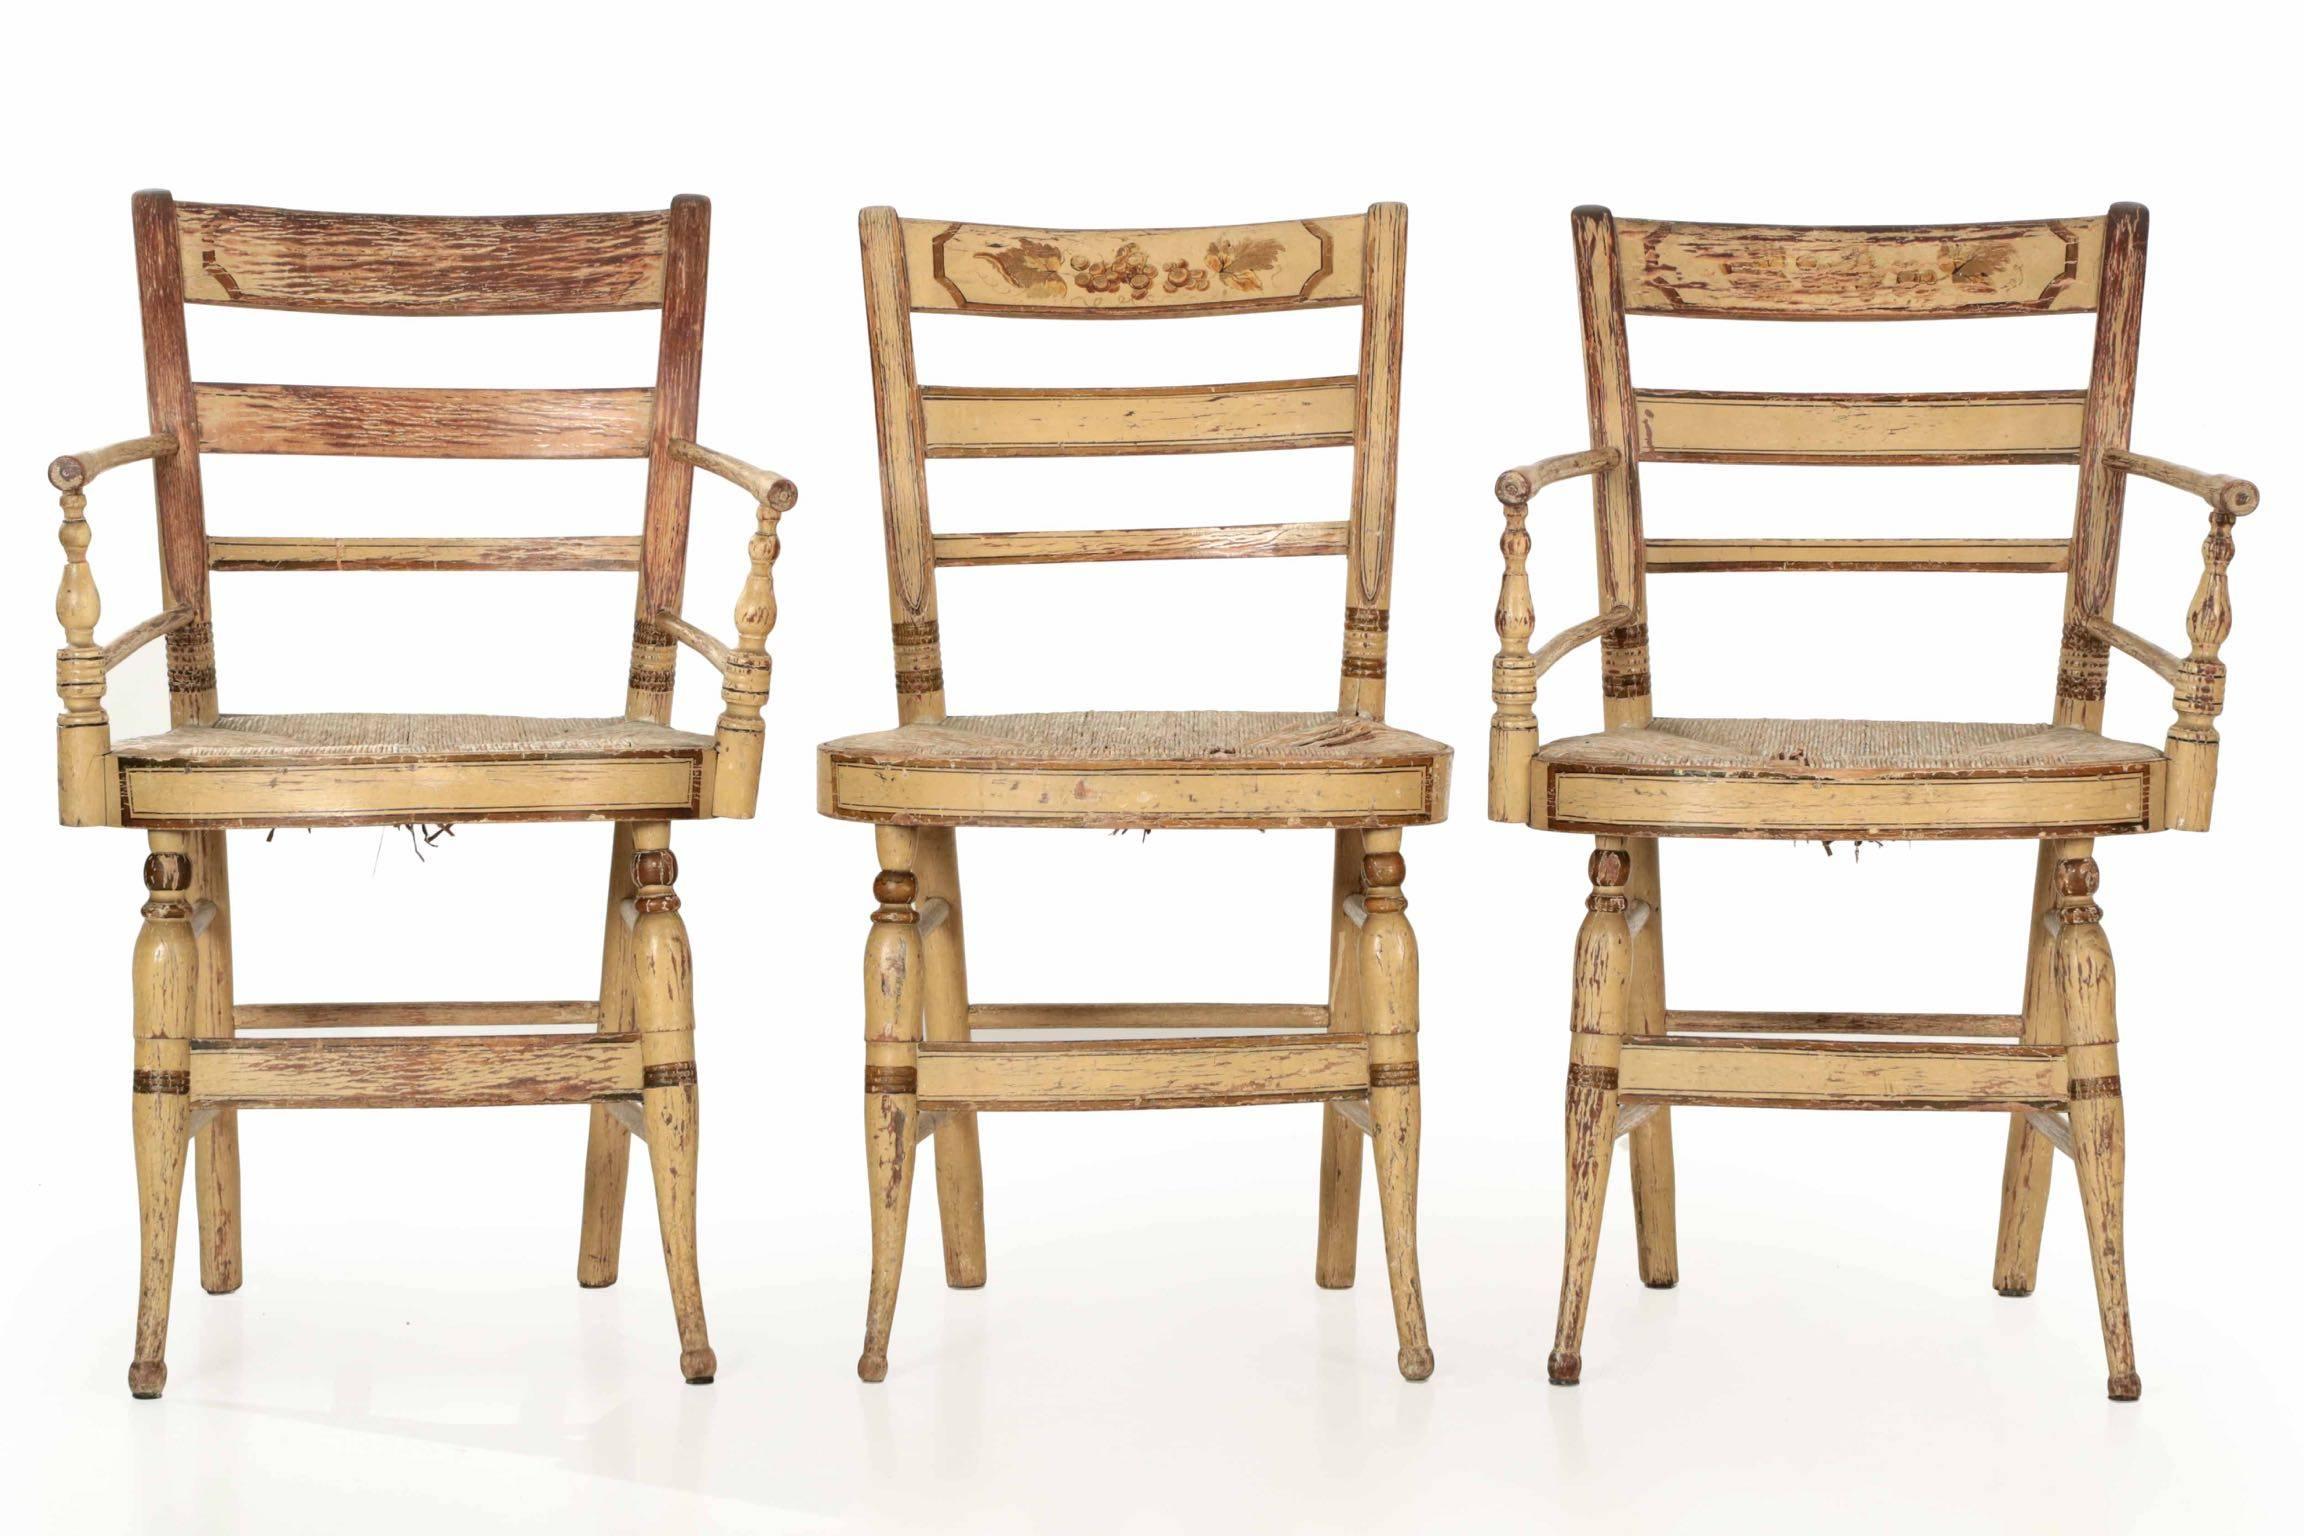 A most interesting and rather rare collection of 11 “fancy” Sheraton chairs, these have remarkably remained together for nearly two-hundred years. They retain a very early and almost certainly original painted surface, the slat back crest with